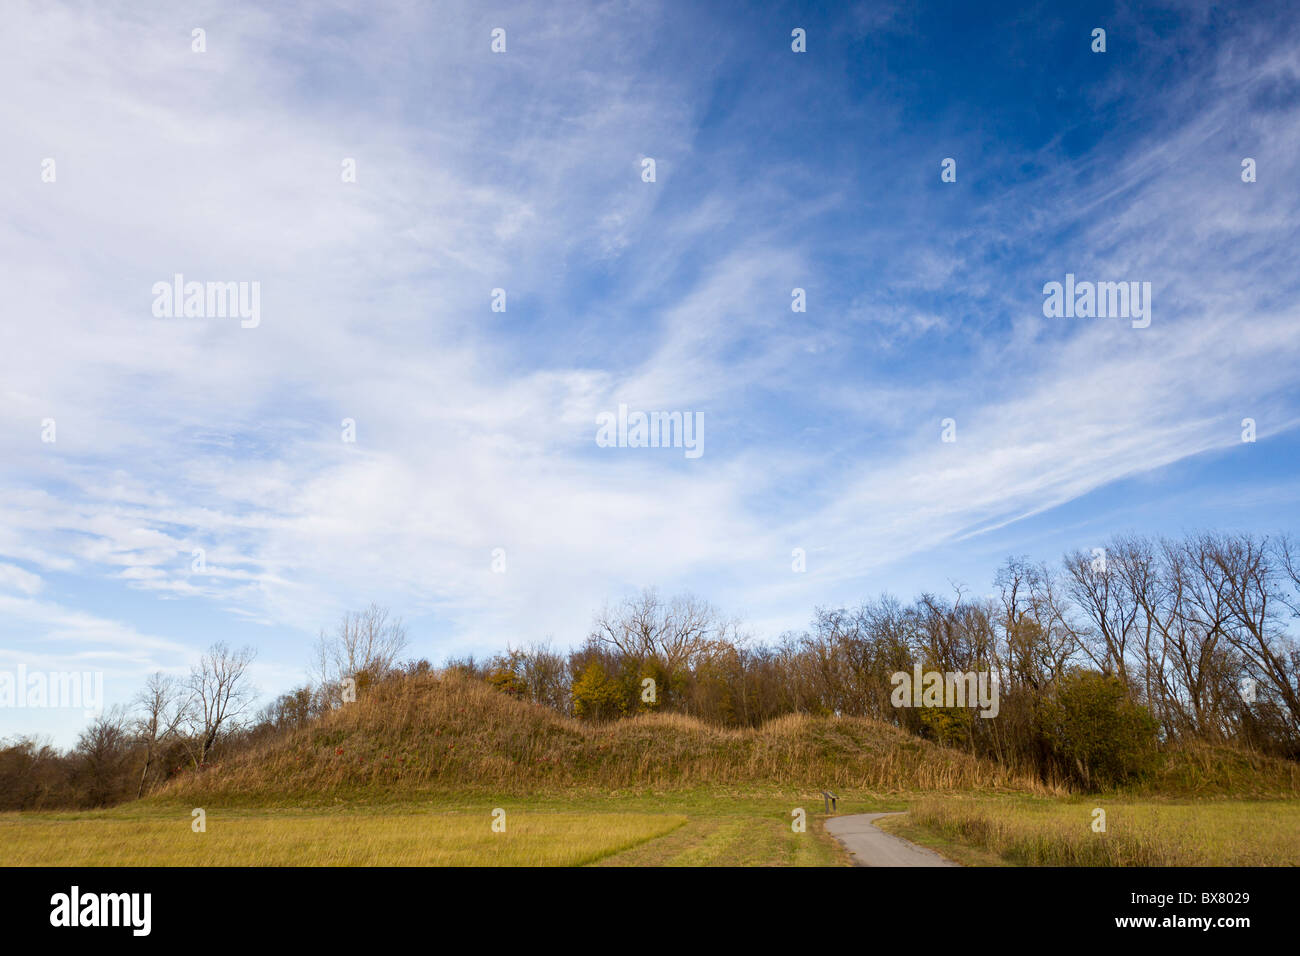 Craig Mound or The Spiro Mound is the only actual burial mound at the Spiro Mounds Archeological Site in Oklahoma, USA. Stock Photo